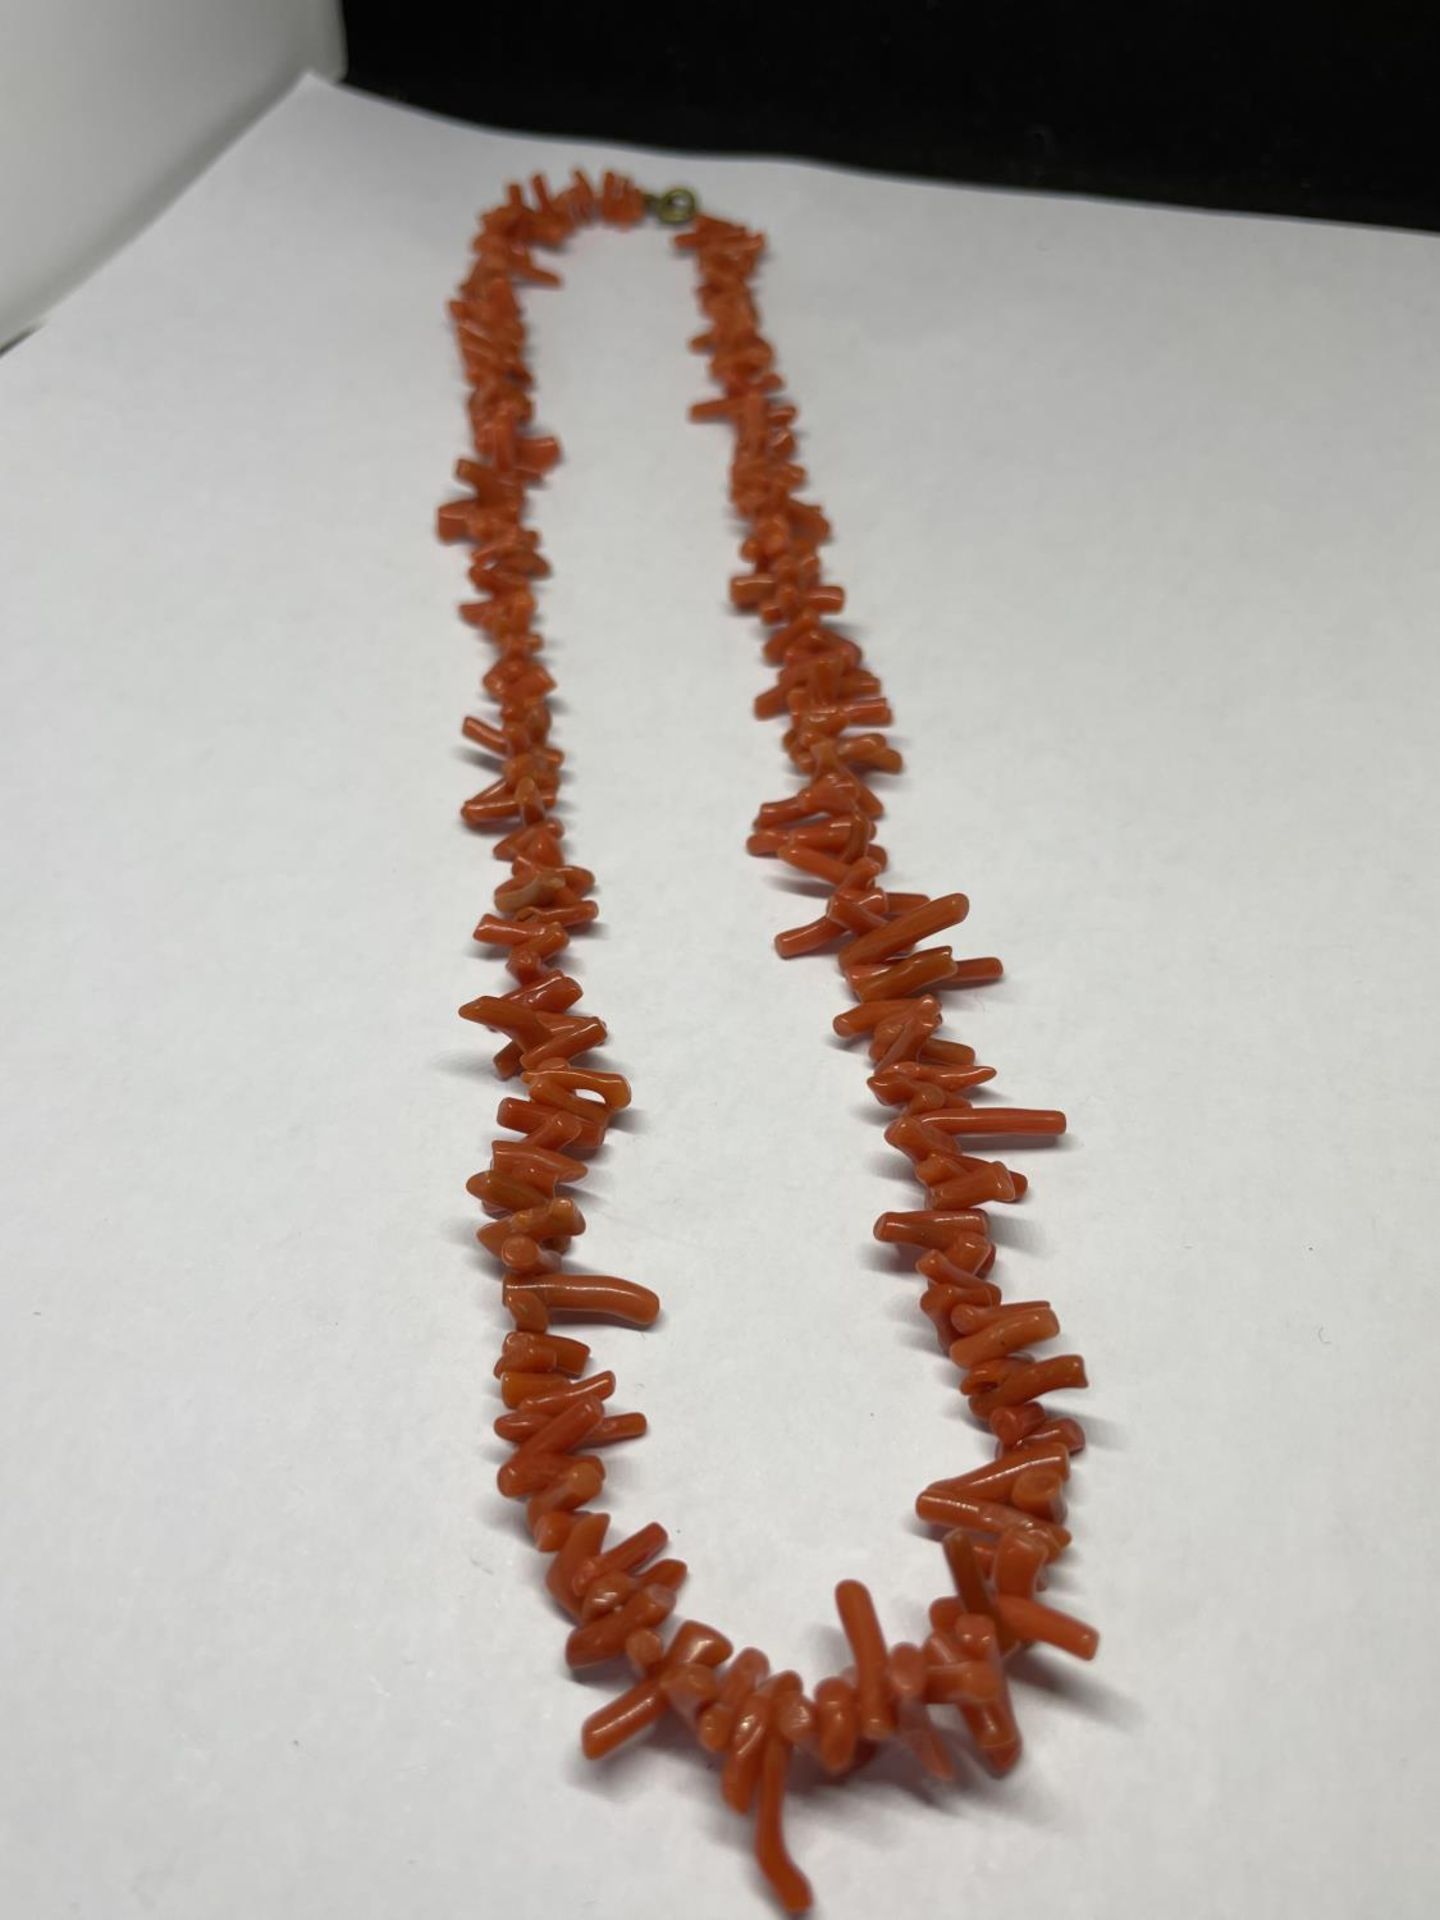 A CORAL NECKLACE IN A PRESENTATION BOX - Image 2 of 6